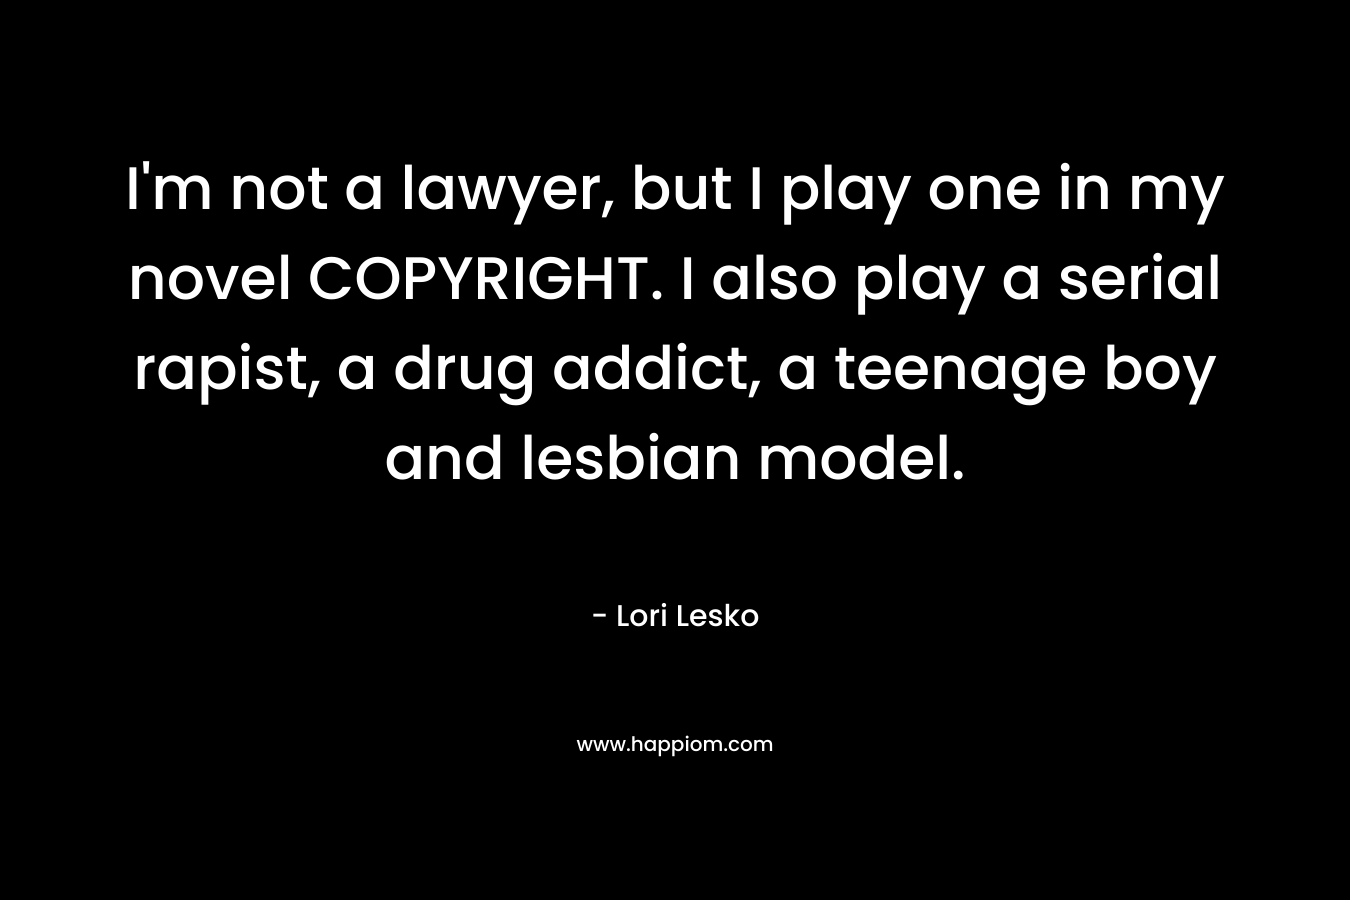 I’m not a lawyer, but I play one in my novel COPYRIGHT. I also play a serial rapist, a drug addict, a teenage boy and lesbian model. – Lori Lesko